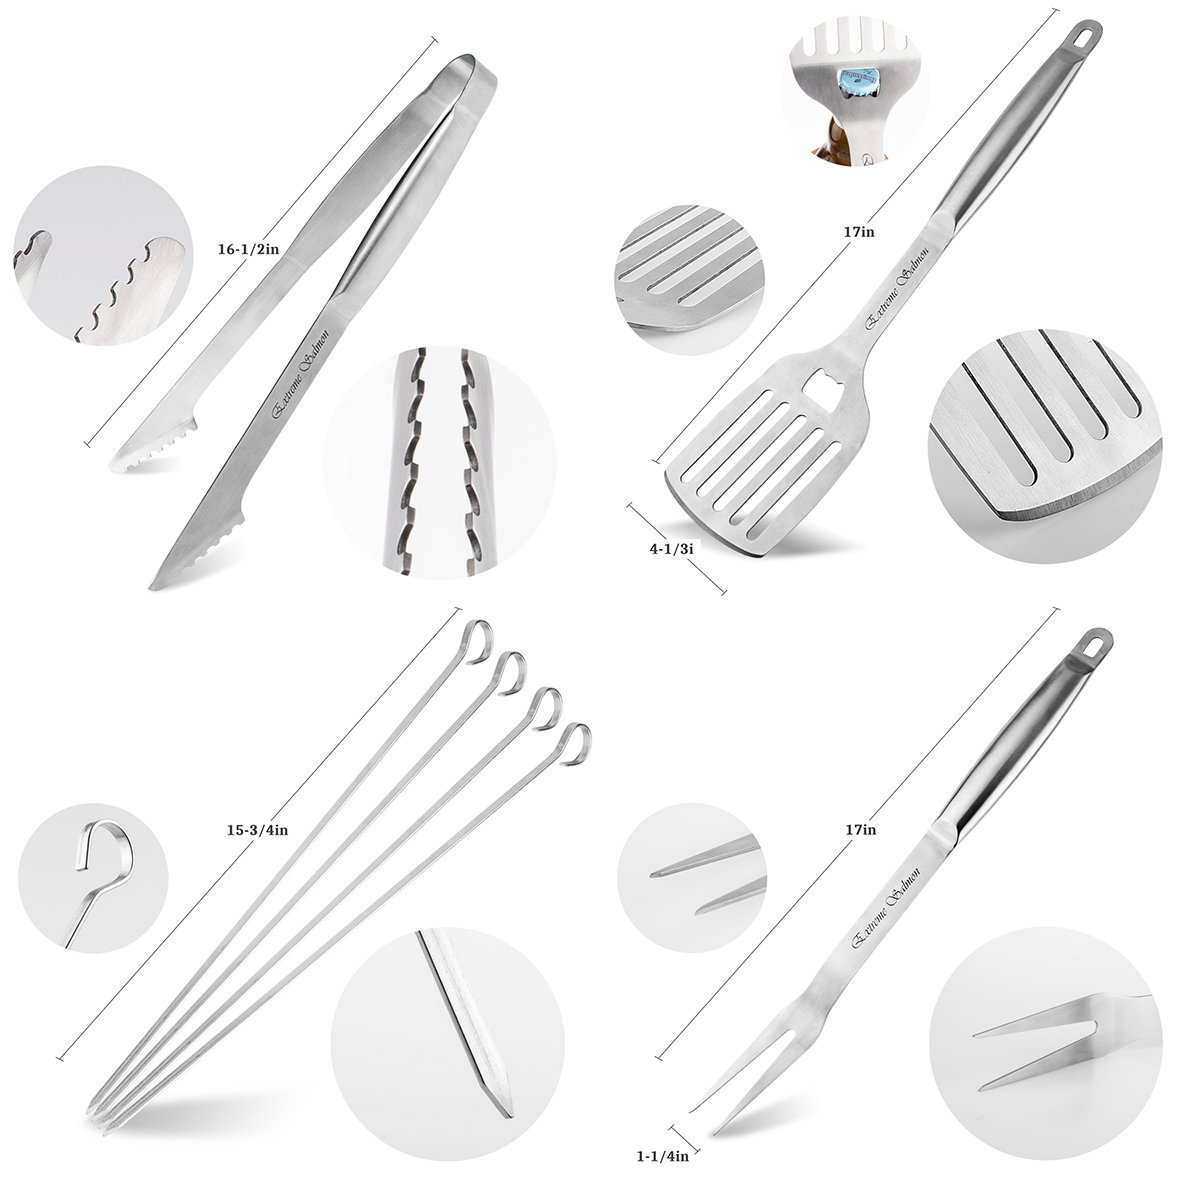 Grill Accessories, BBQ Tool Sets 7 PCS Grill Set Stainless Steel Grilling Utensils Heavy Duty Grill Tool Sets for Barbecue,Spatula,Tongs,Fork and 4 Skewers, Best Outdoor Grill Kit for Dad or Husband - image 2 of 7